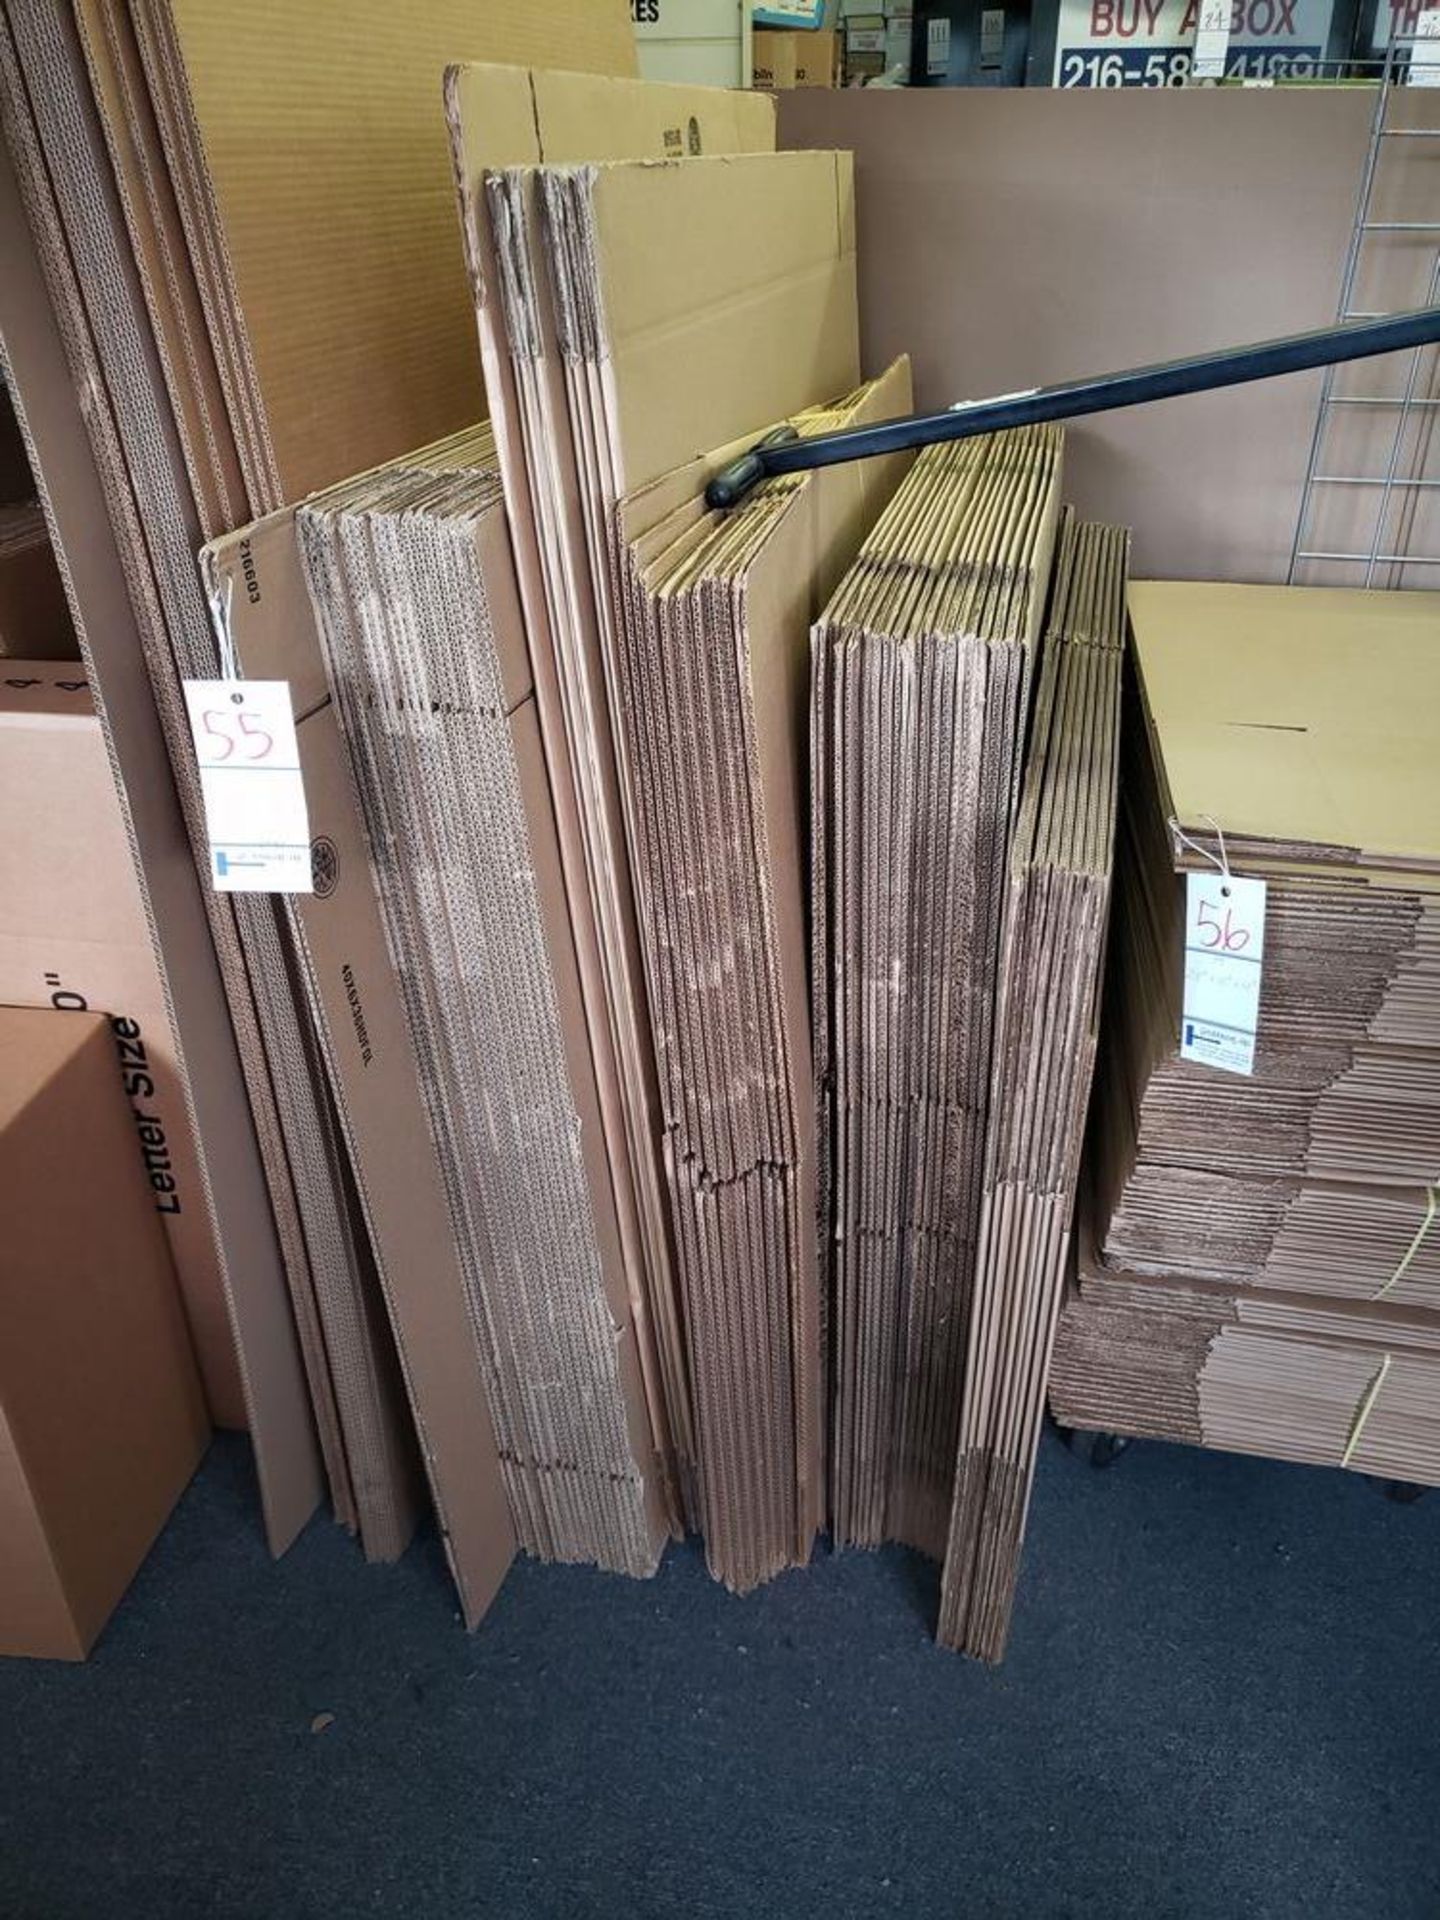 ASSORTED CORRUGATED BOXES (Note: Your bid is multiplied by the quantity)